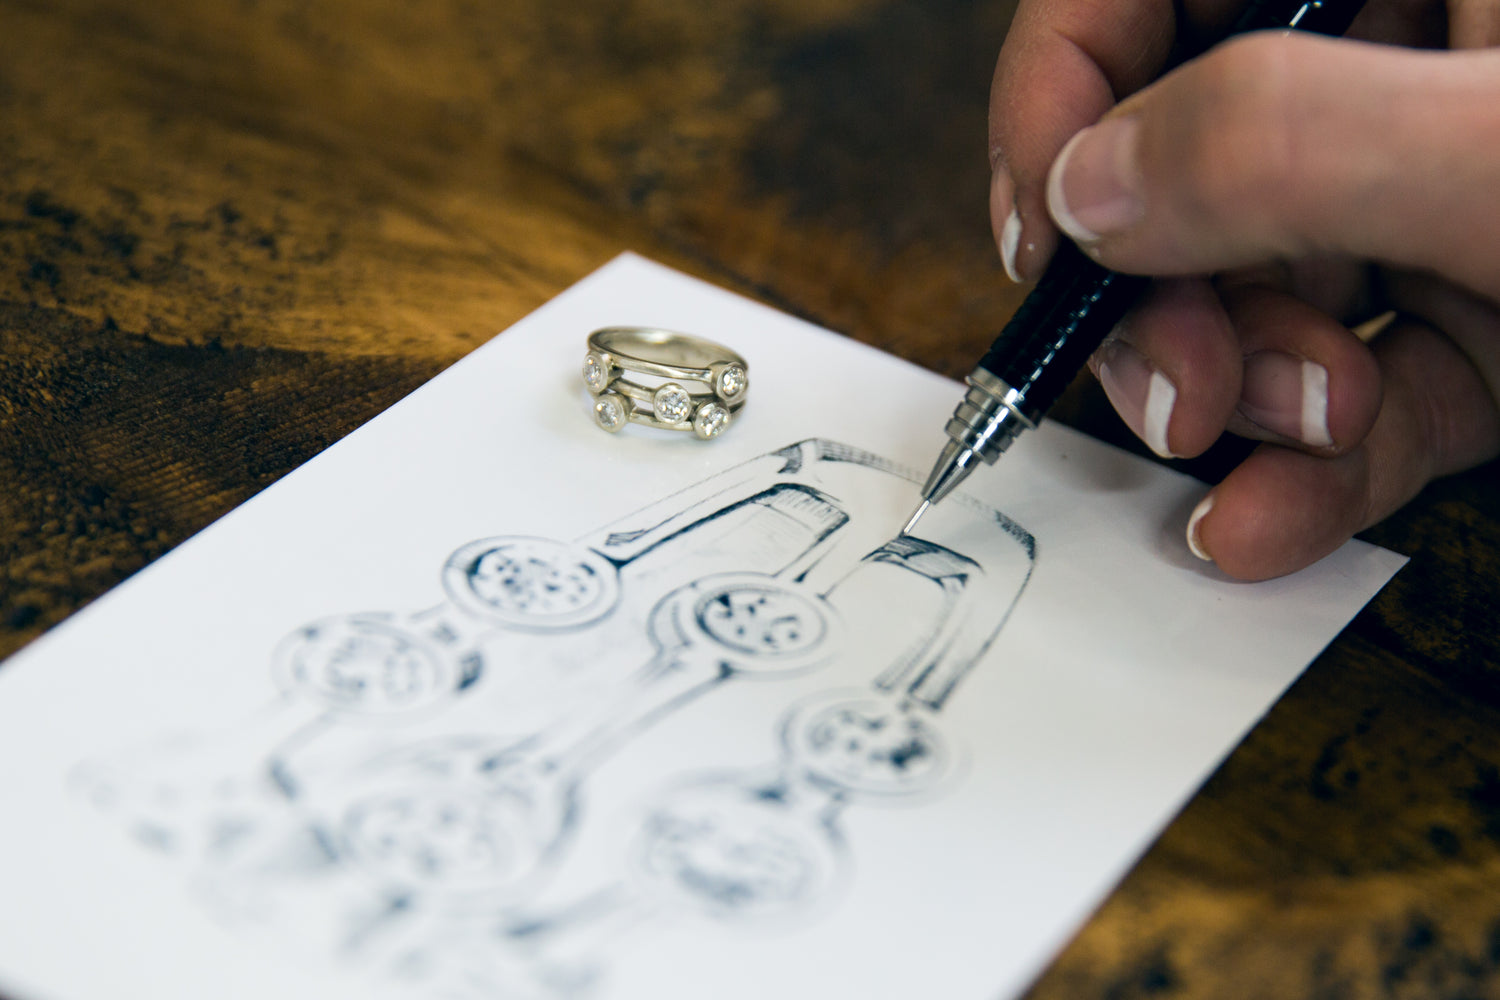 Commissioned bespoke jewellery designs